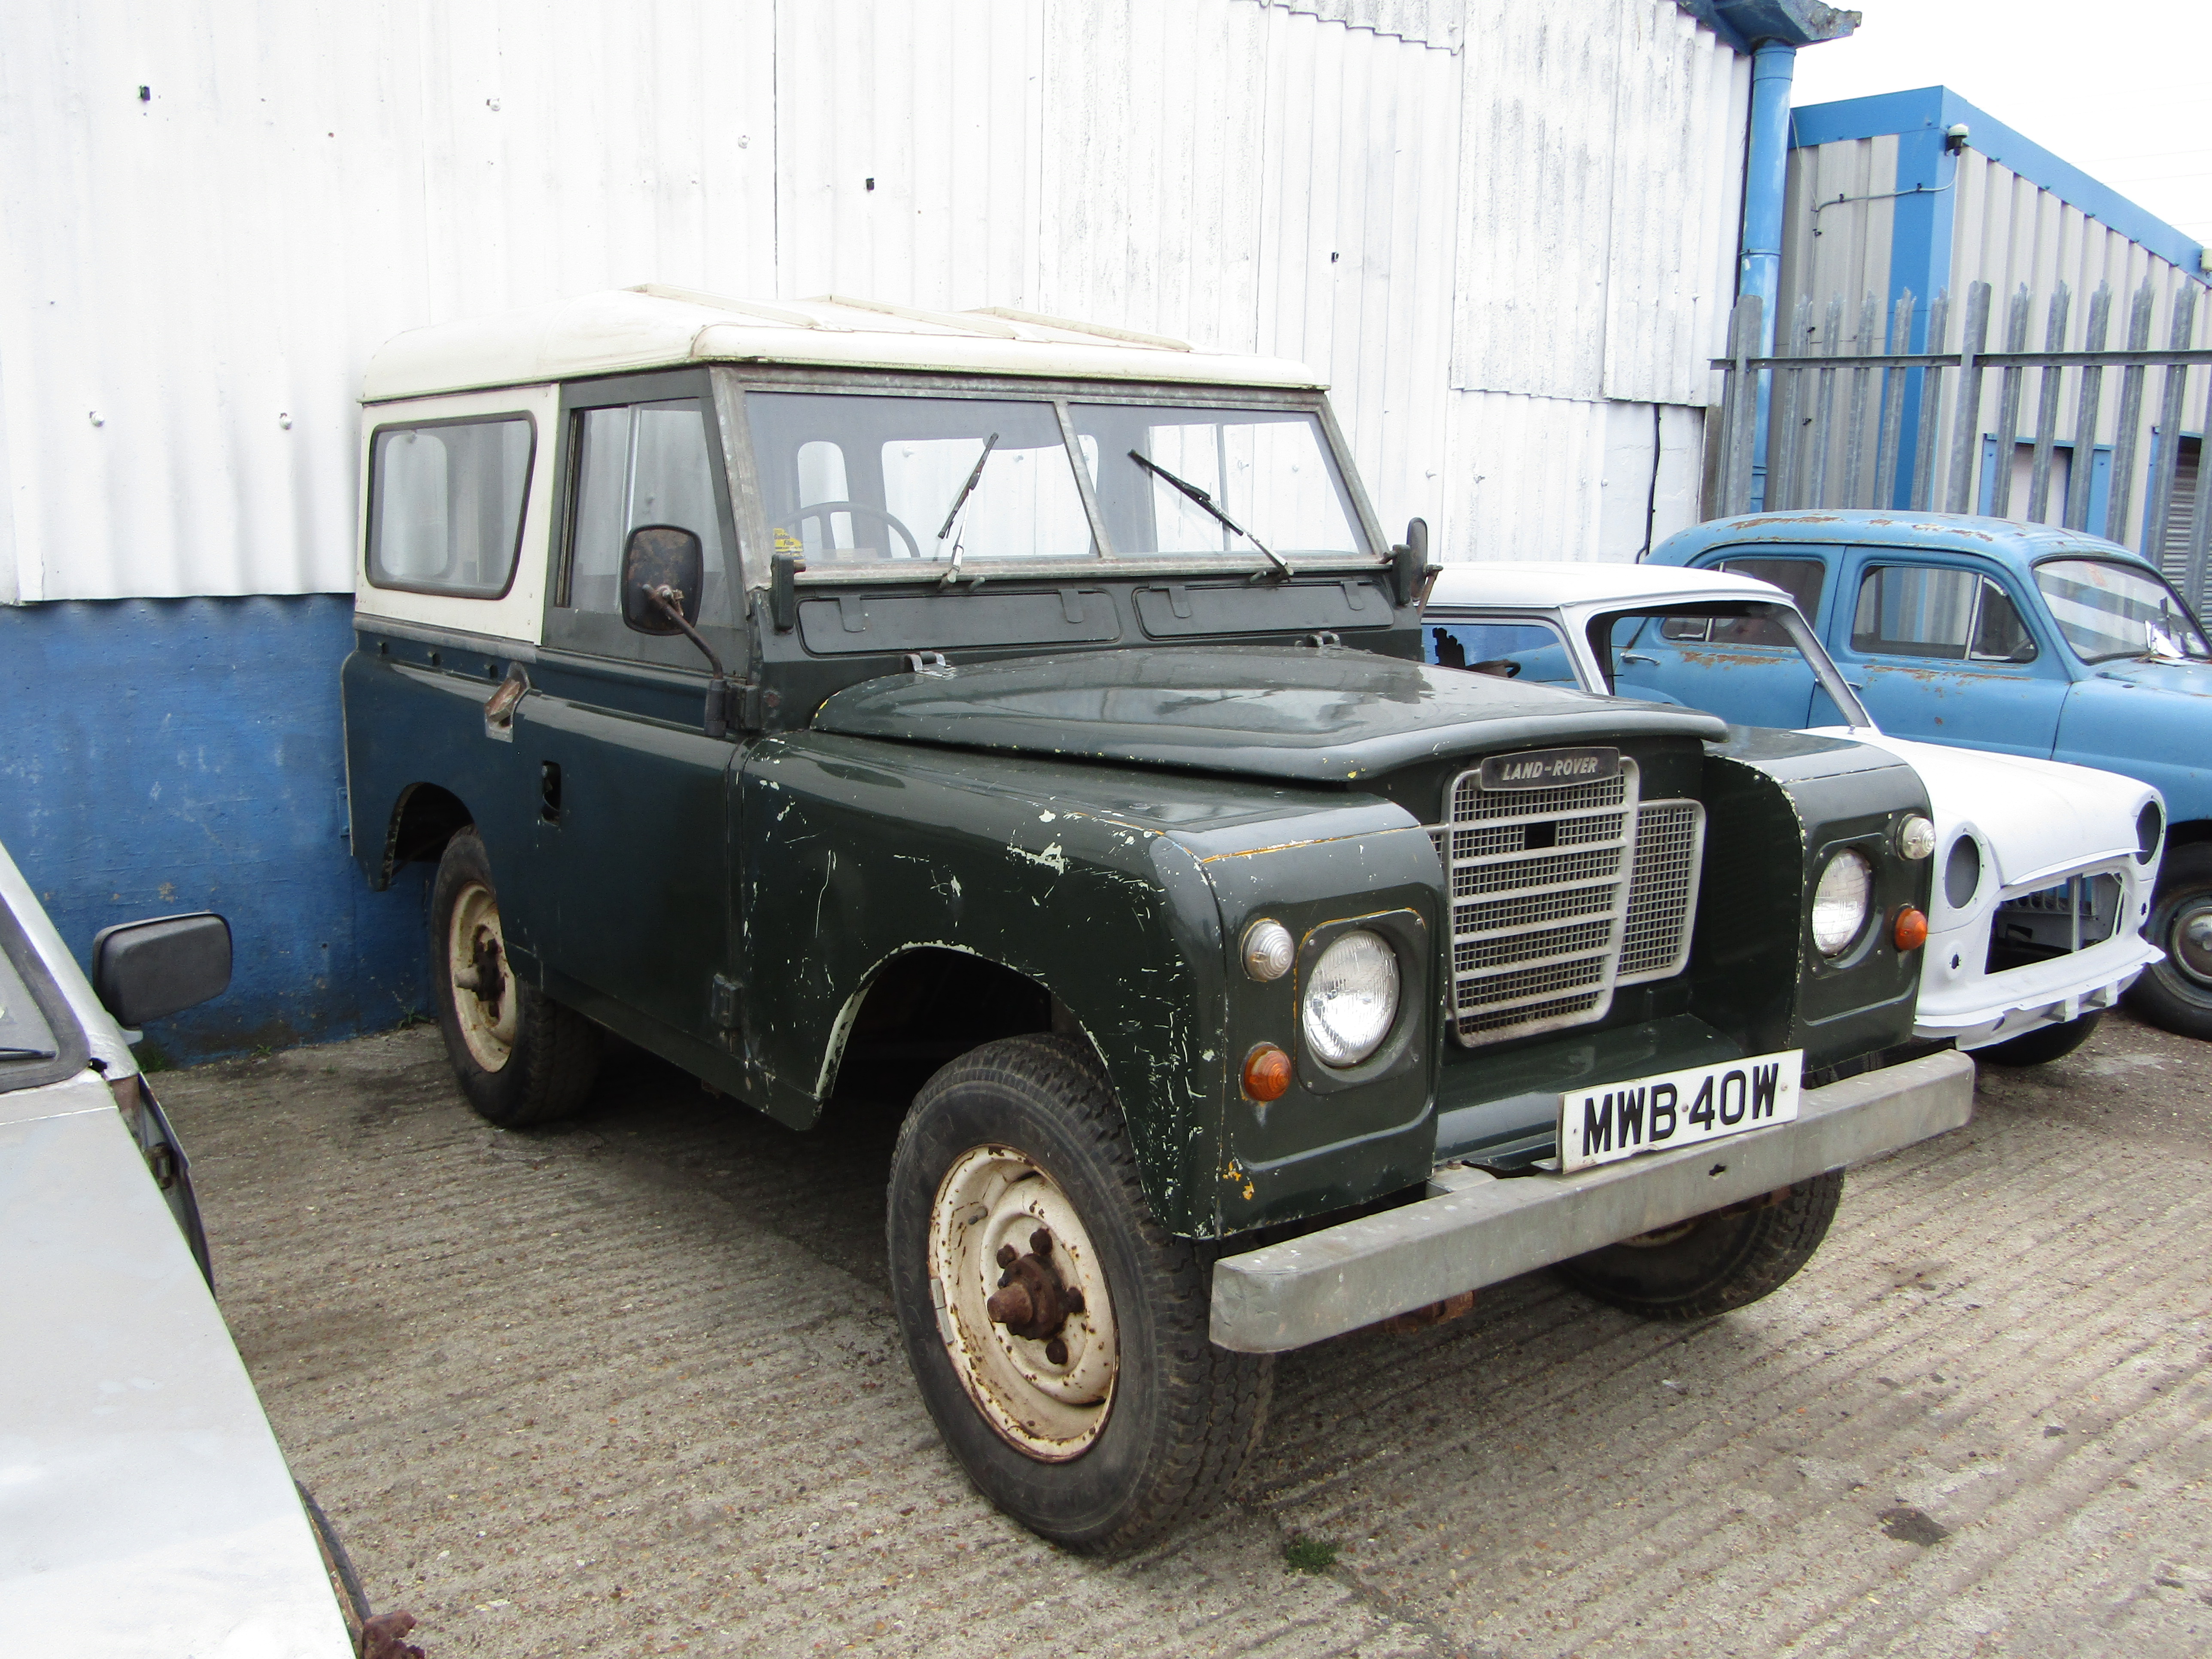 1981 Land Rover Series 3 SWB - Image 2 of 20